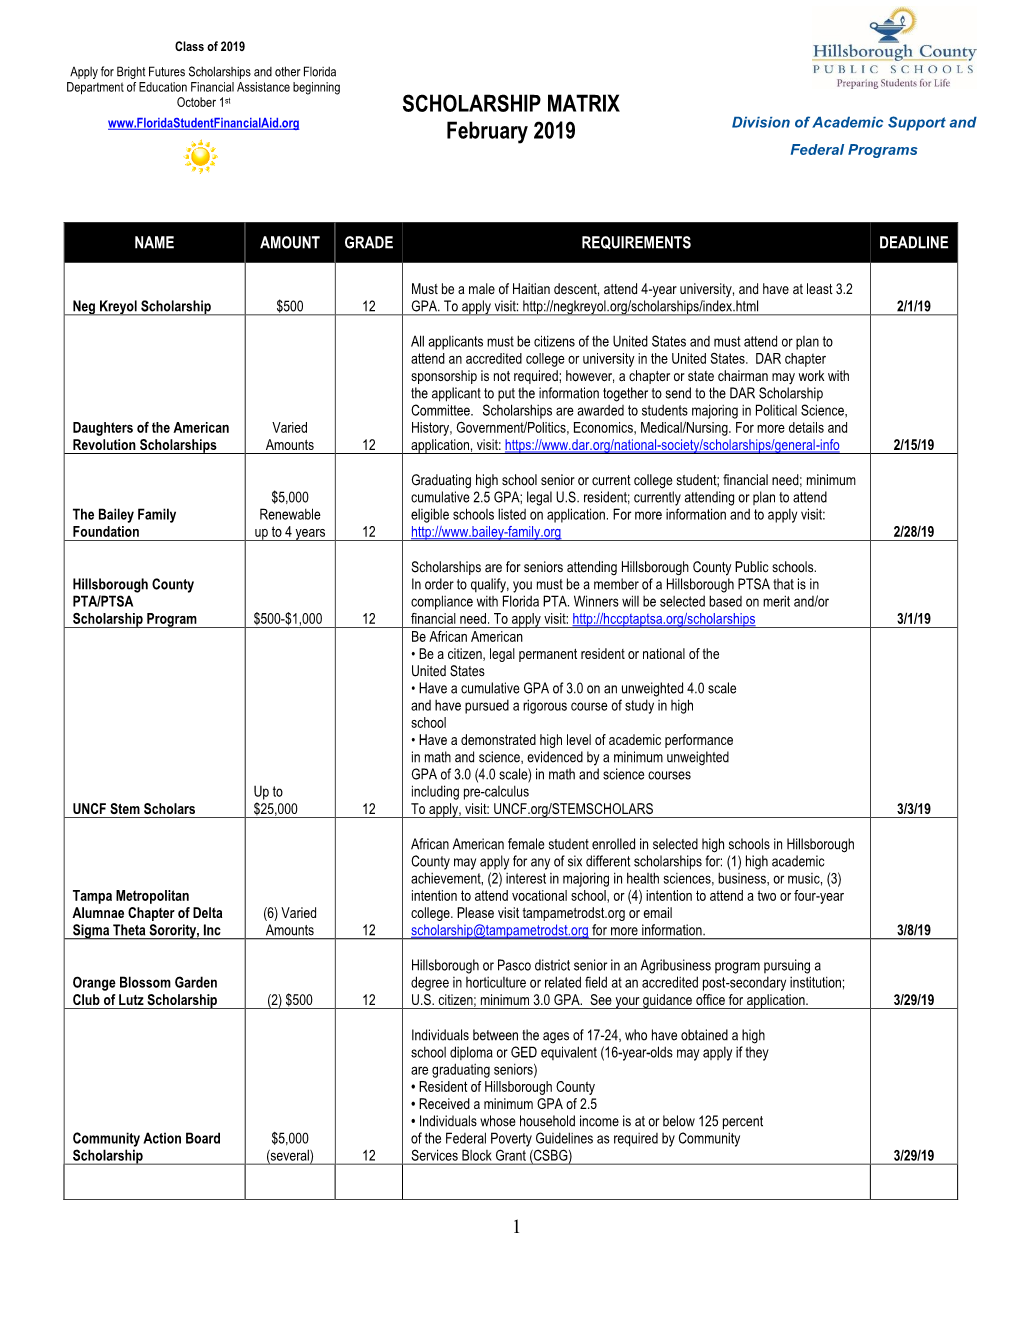 SCHOLARSHIP MATRIX February 2019 Division of Academic Support and Federal Programs